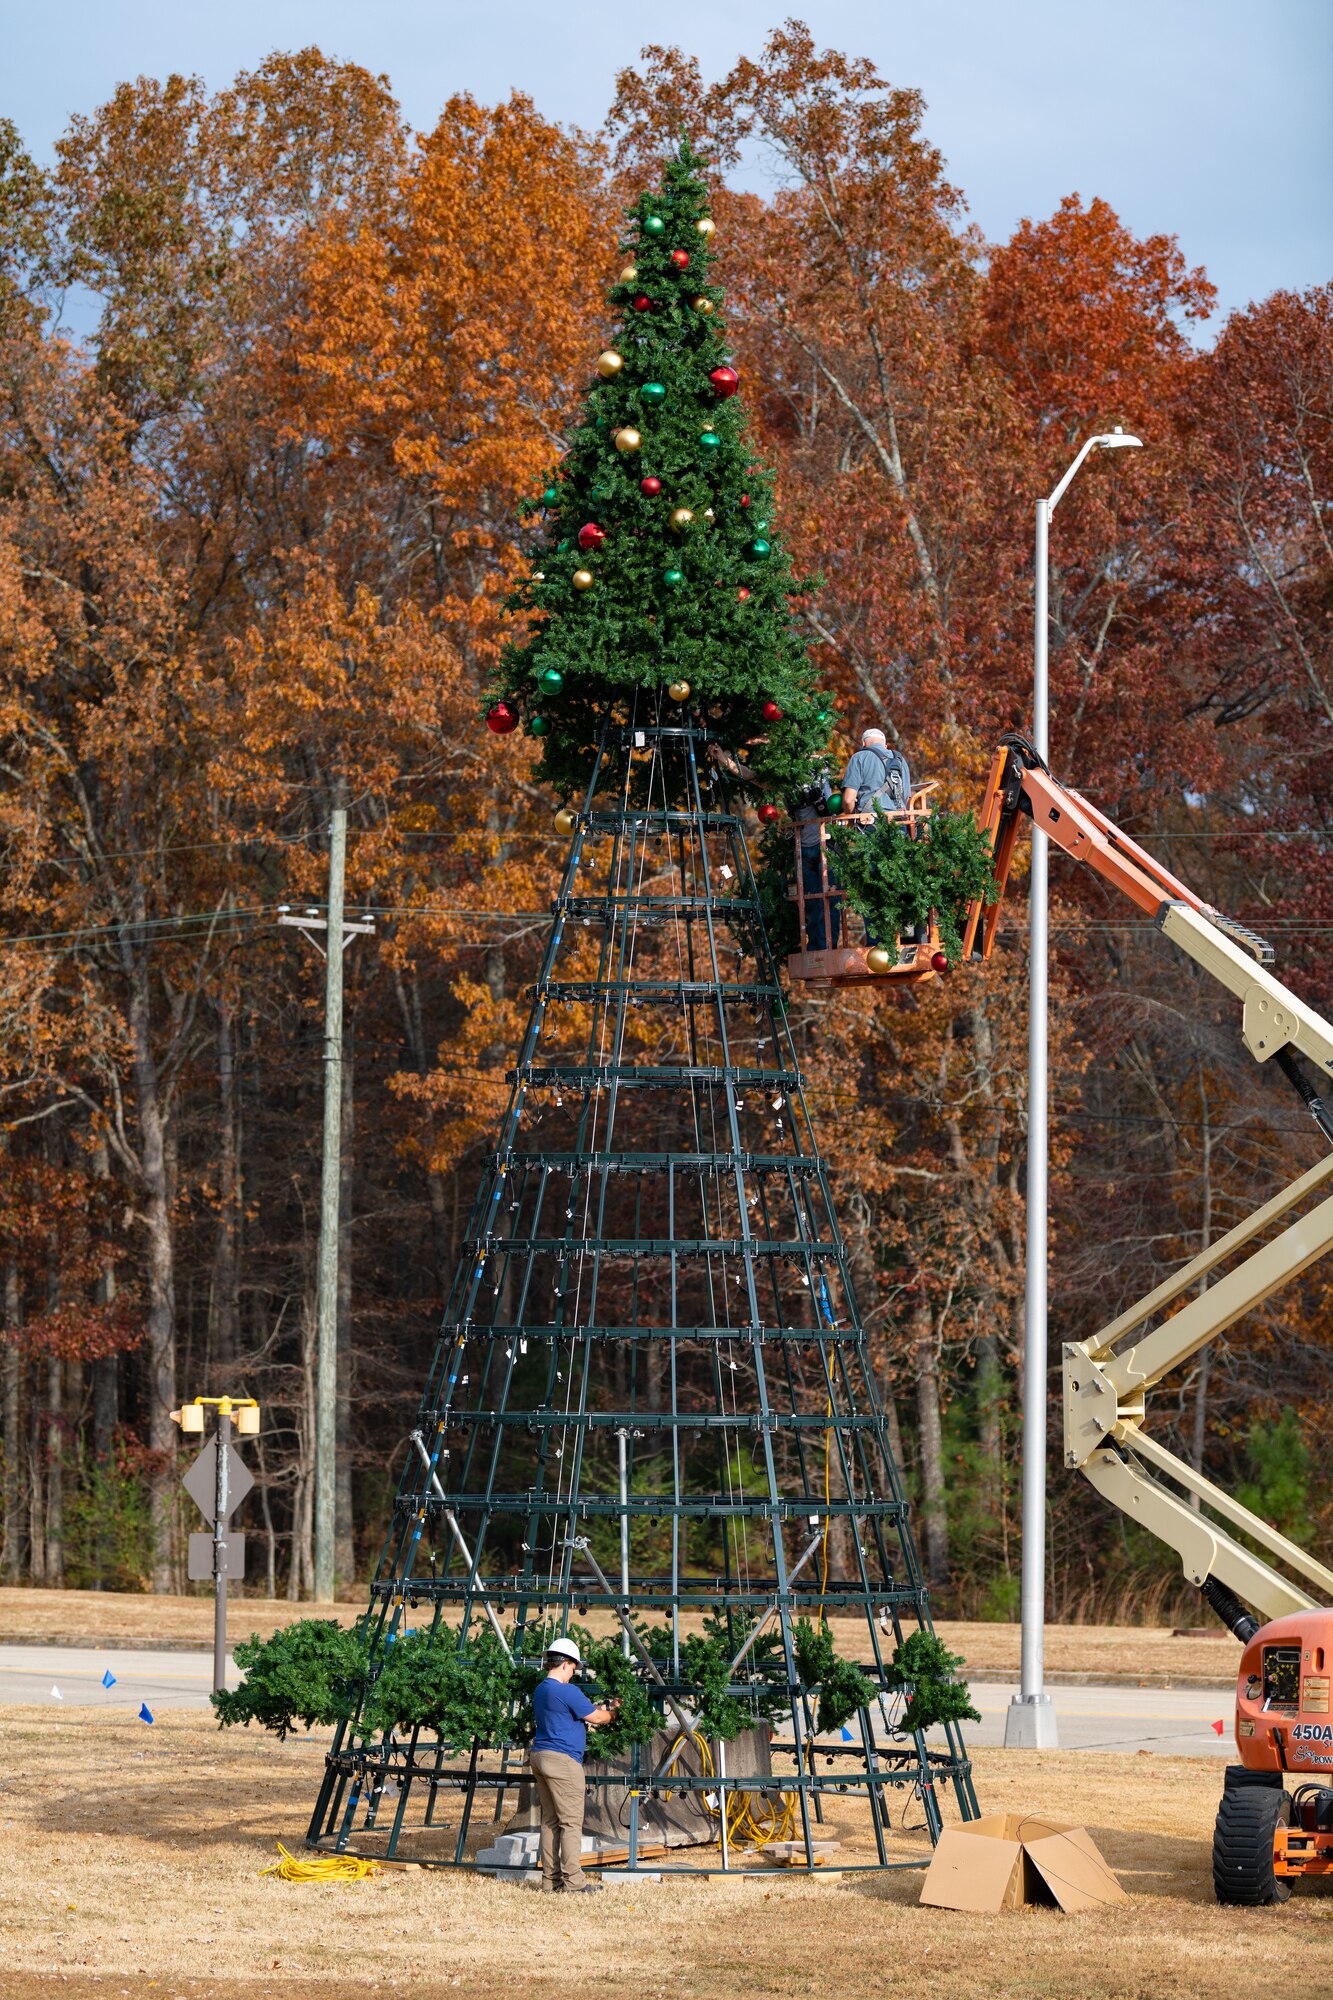 Arnold Air Force Base team members help assemble the large Christmas tree located just inside the Main Gate at Arnold AFB, Tenn, Nov. 9, 2023. A lighting ceremony for the 40-foot-tall, 22-foot-wide tree is scheduled for Dec. 4, 2023, at 4 p.m. (U.S. Air Force photo by Keith Thornburgh)